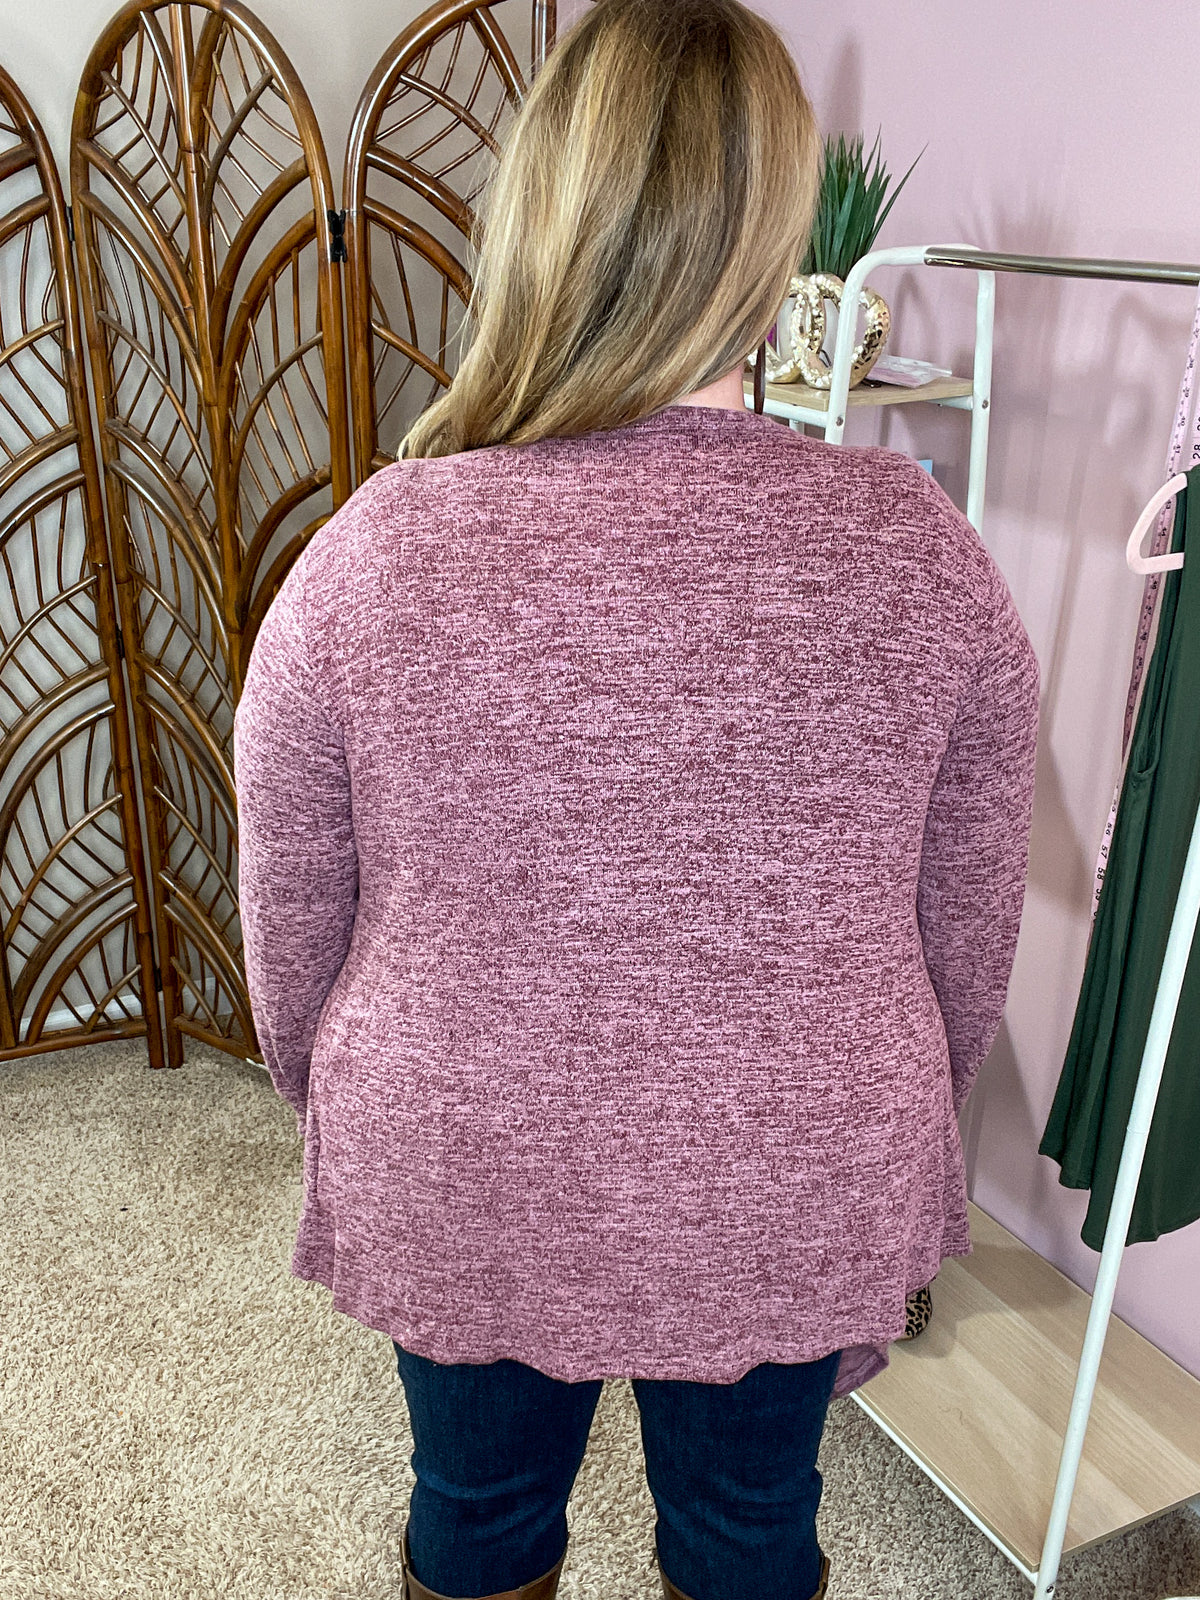 We Were Dancing Knit Cardigan - Muted Maroon